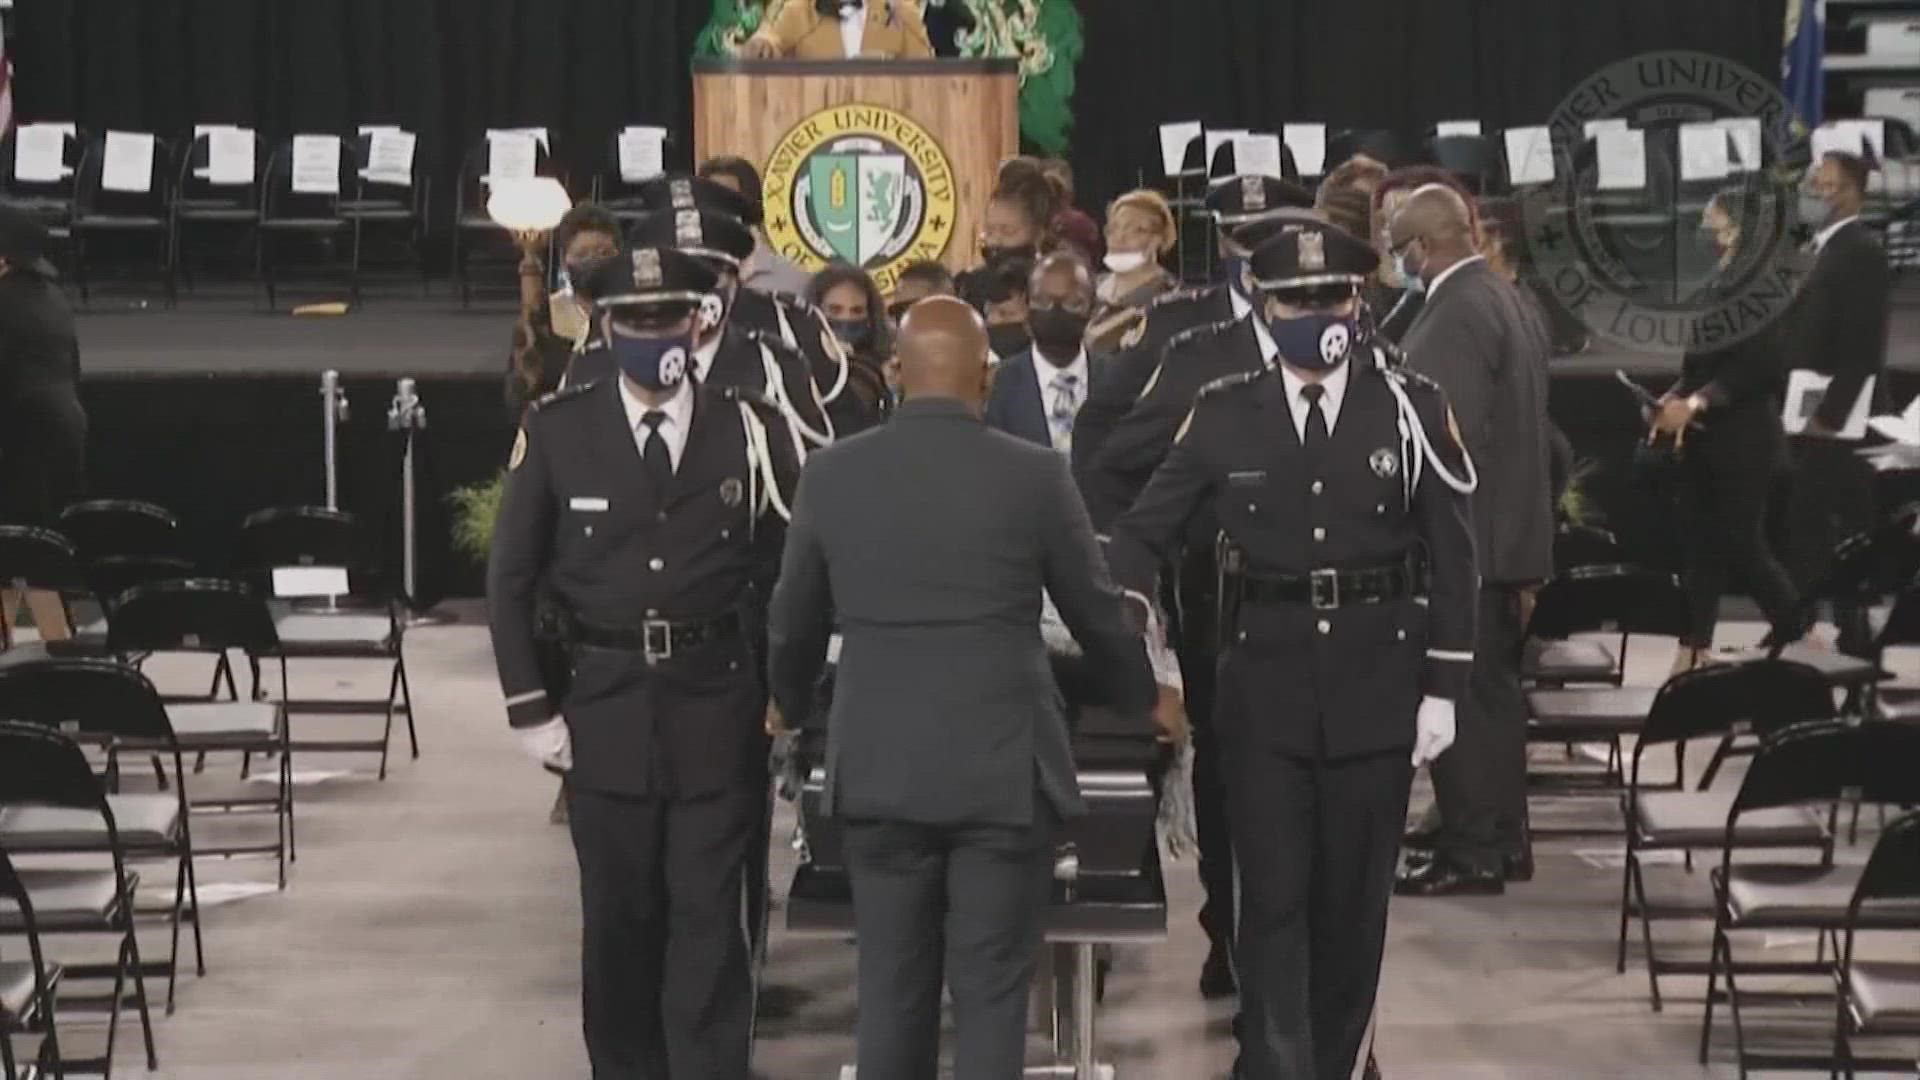 Detective Briscoe's body arrived back in New Orleans from Houston earlier this week, days after he was shot and killed outside Grotto restaurant.